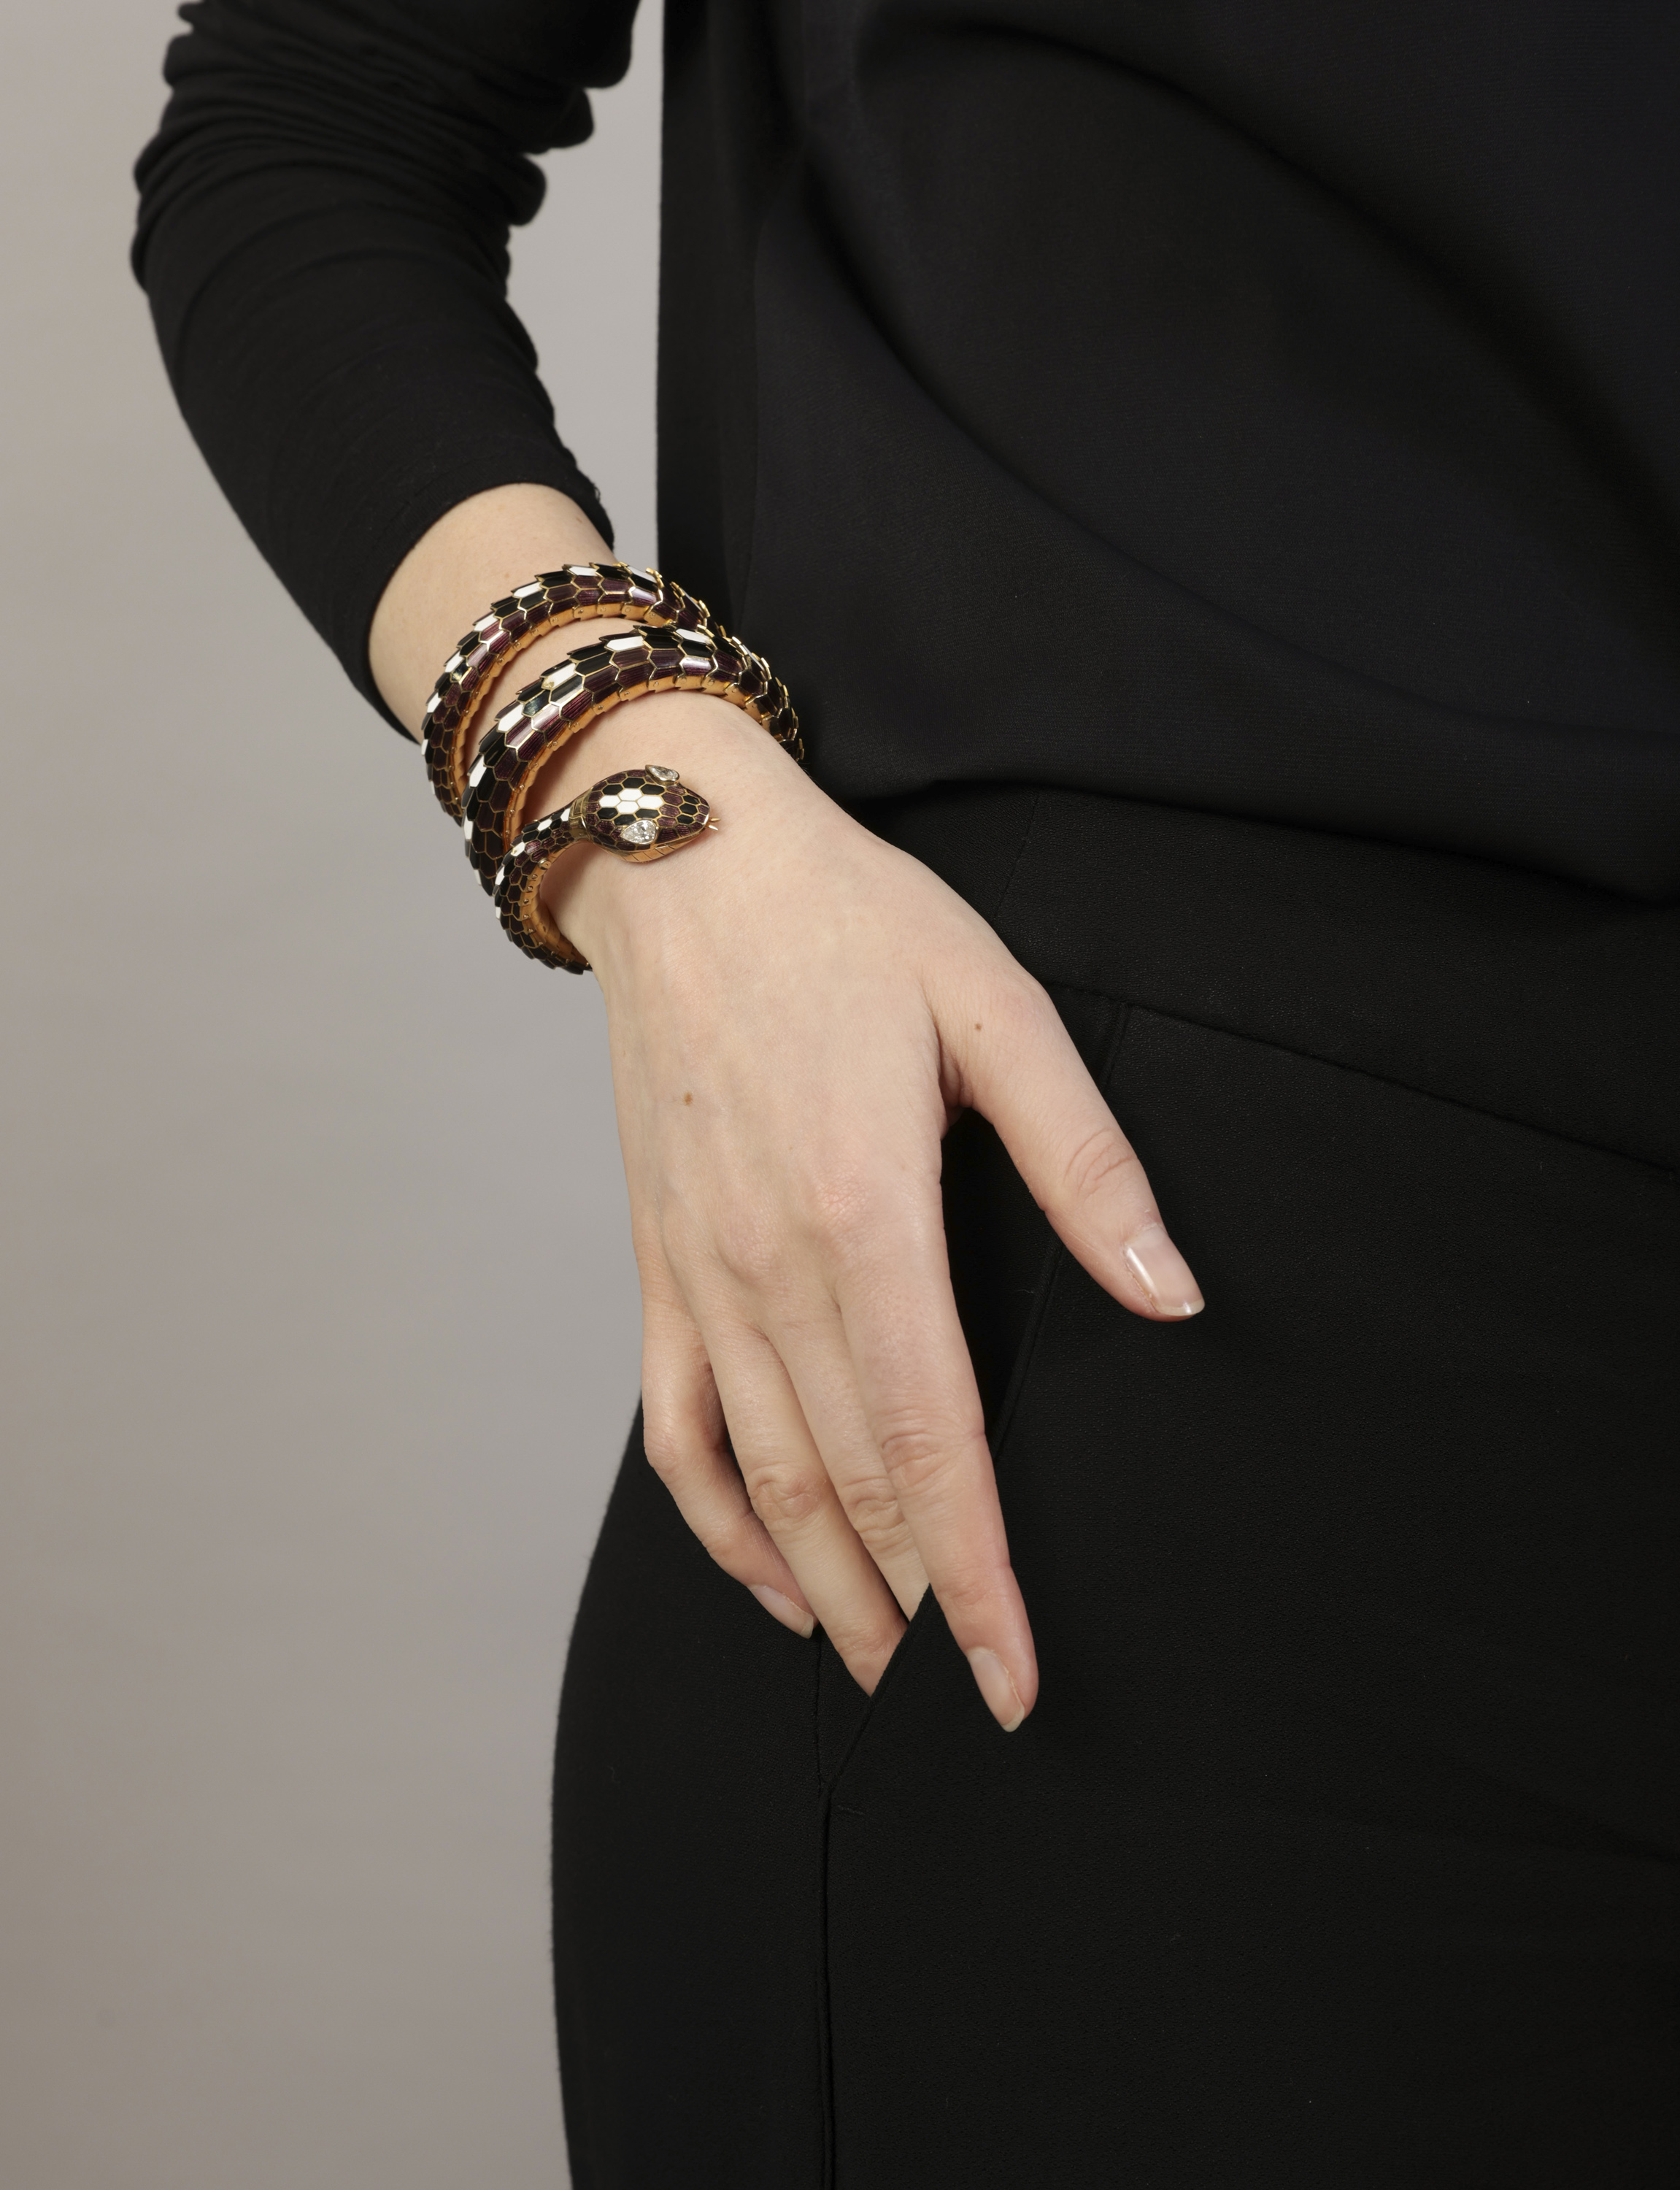 A RARE AND COLLECTIBLE 'SERPENTI' BRACELET WATCH, BY BULGARI, CIRCA 1960 Designed as a snake, the - Image 8 of 14